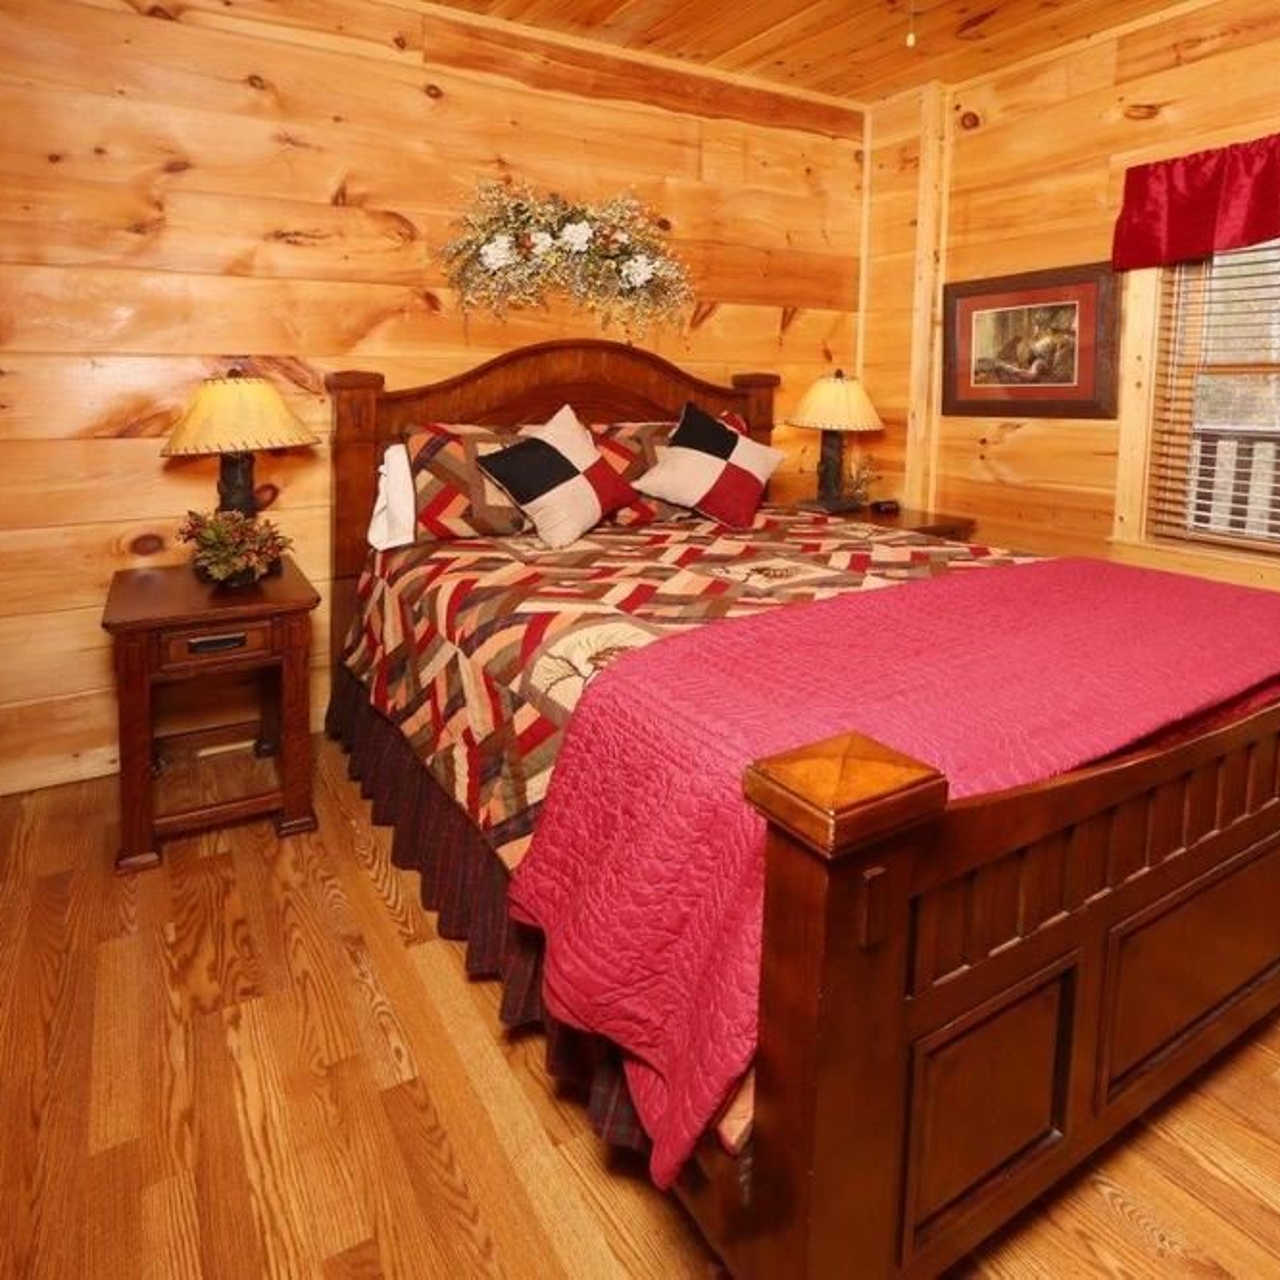 Hotel Smoky Mountain Getaway 5 Br Cabin By Redawning 3 Hrs Star